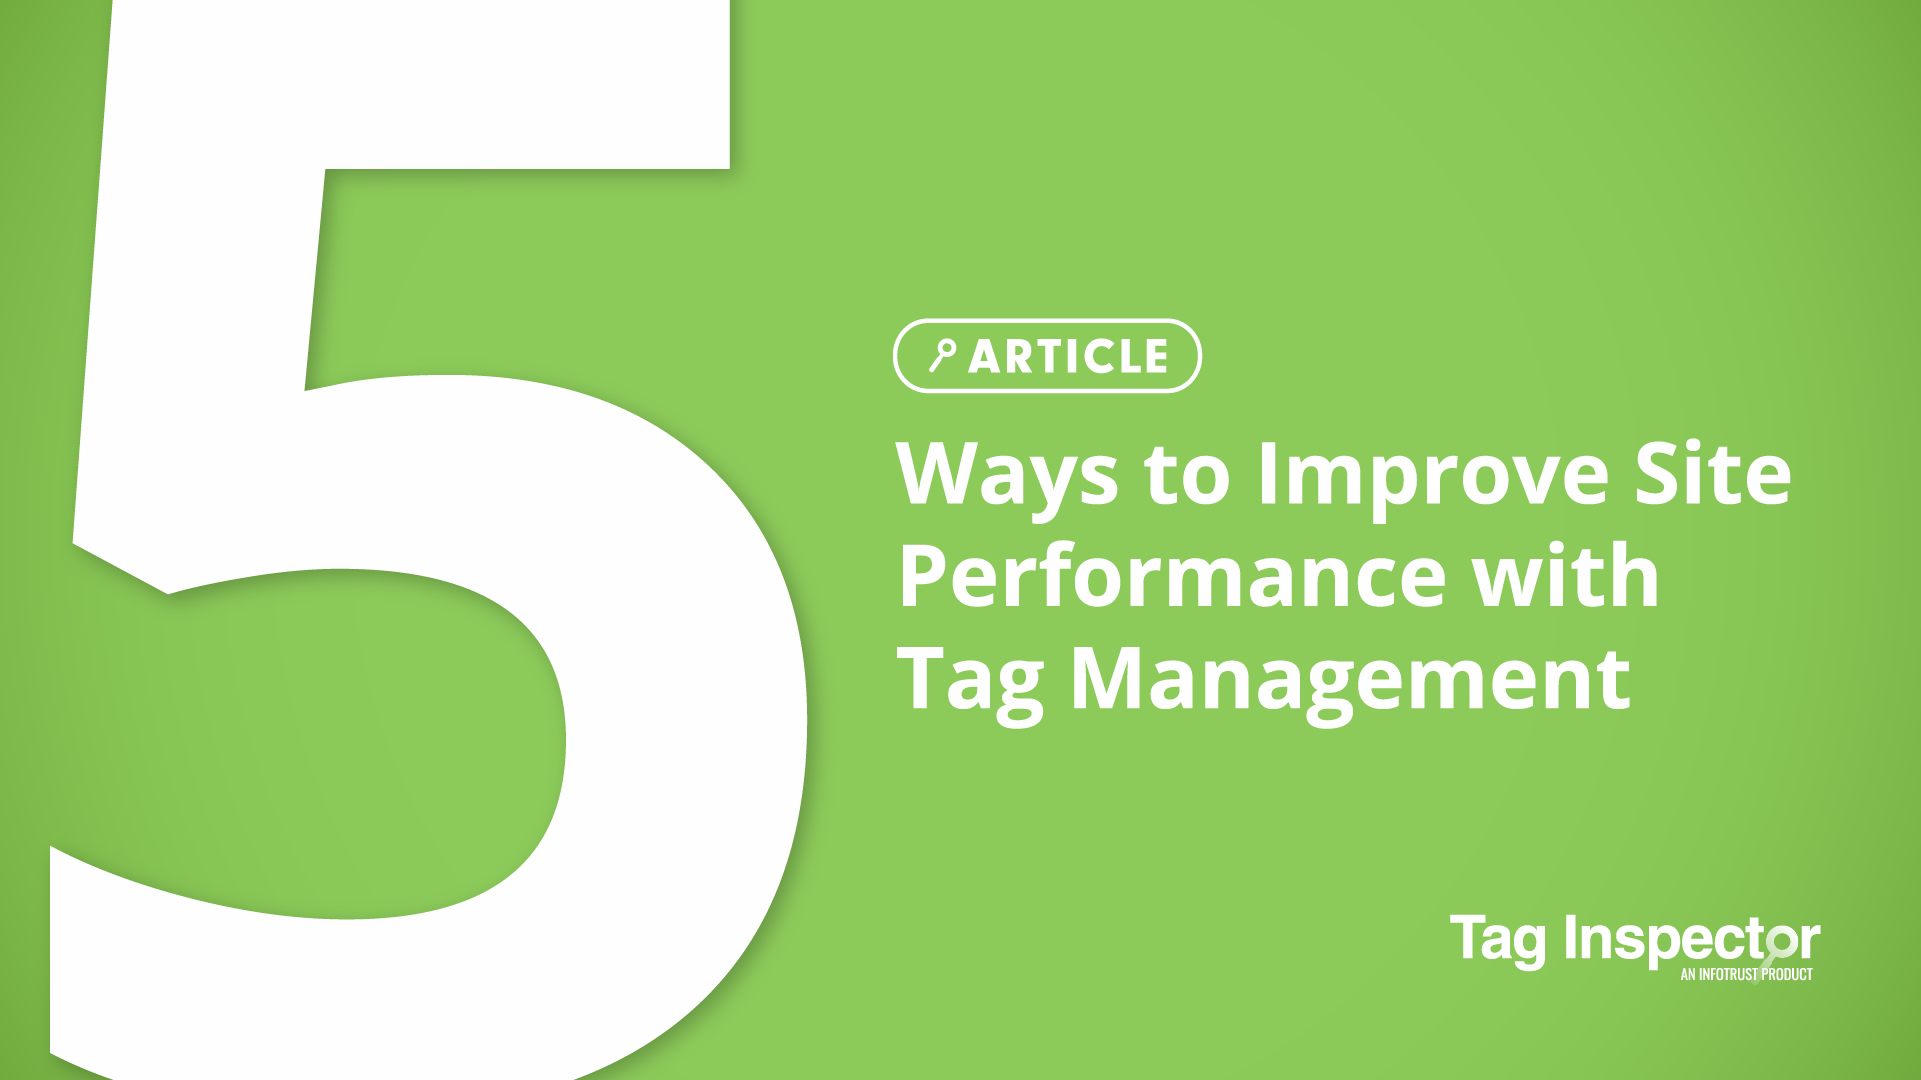 5 Ways to Improve Site Performance with Tag Management